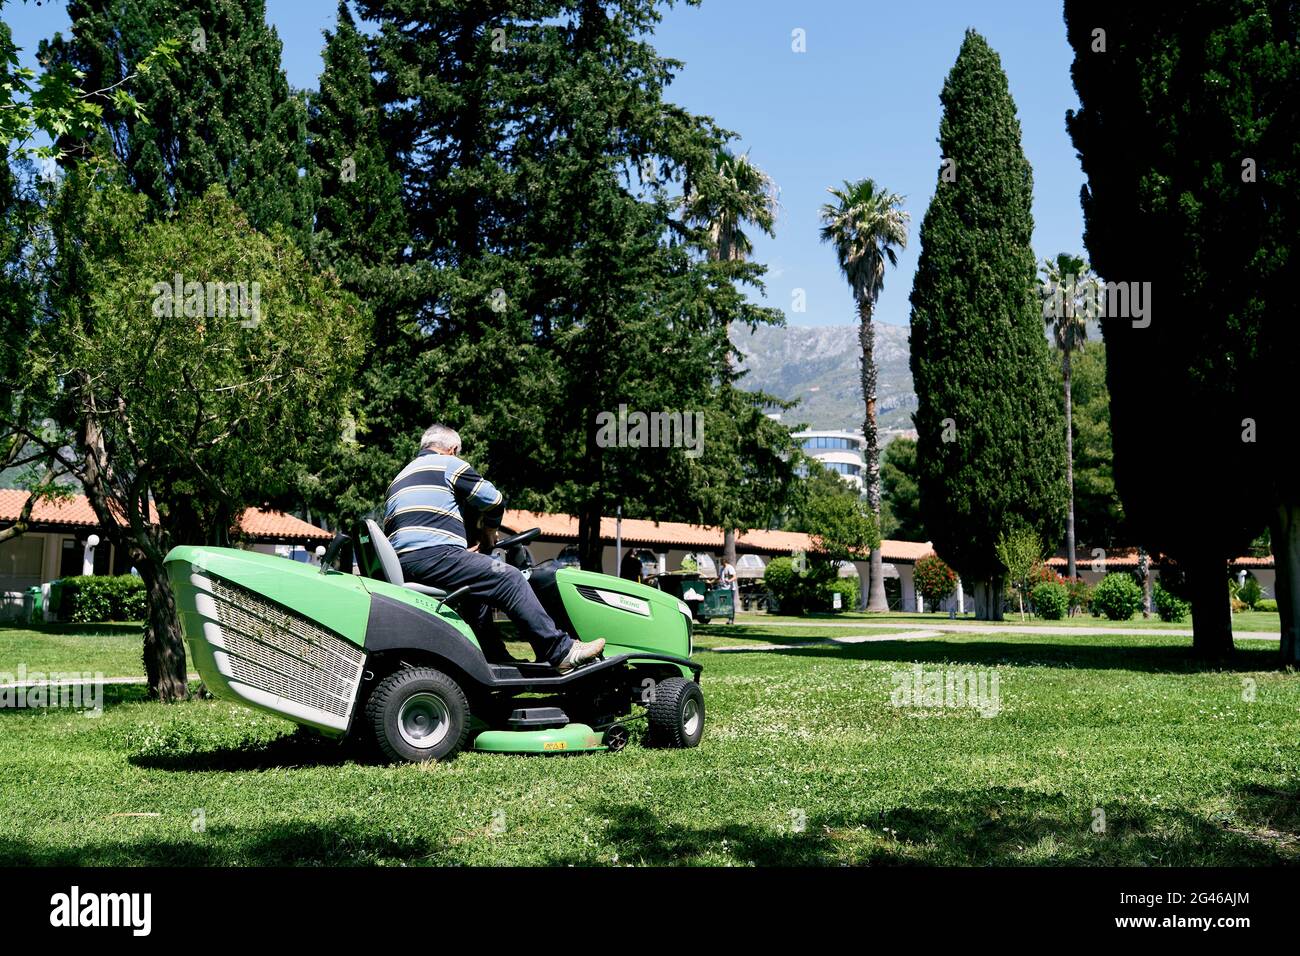 Man rides a green large lawn mower in the park Stock Photo